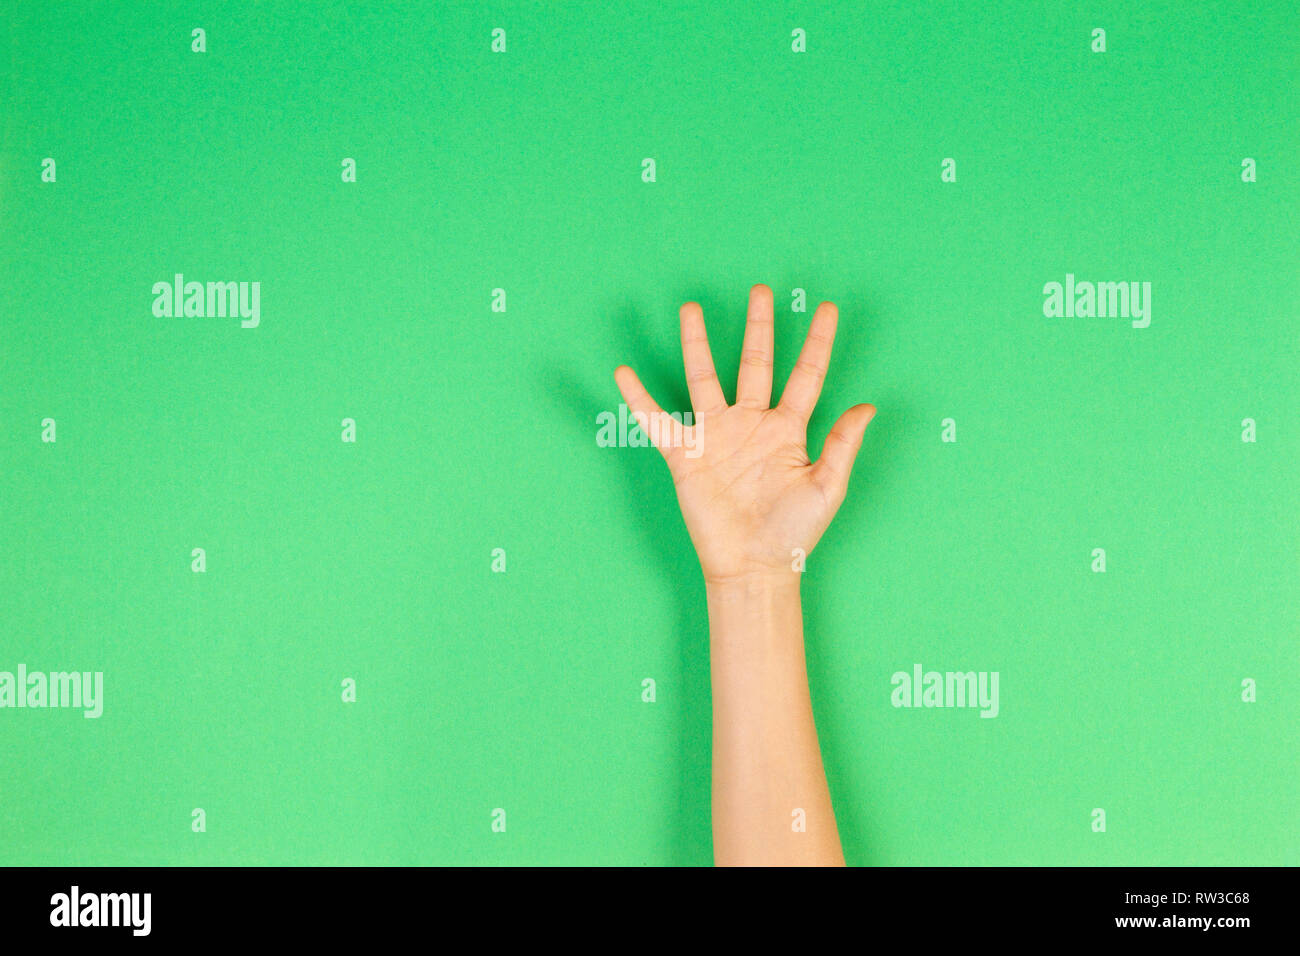 Kid hand palm or showing five fingers on green background Stock Photo